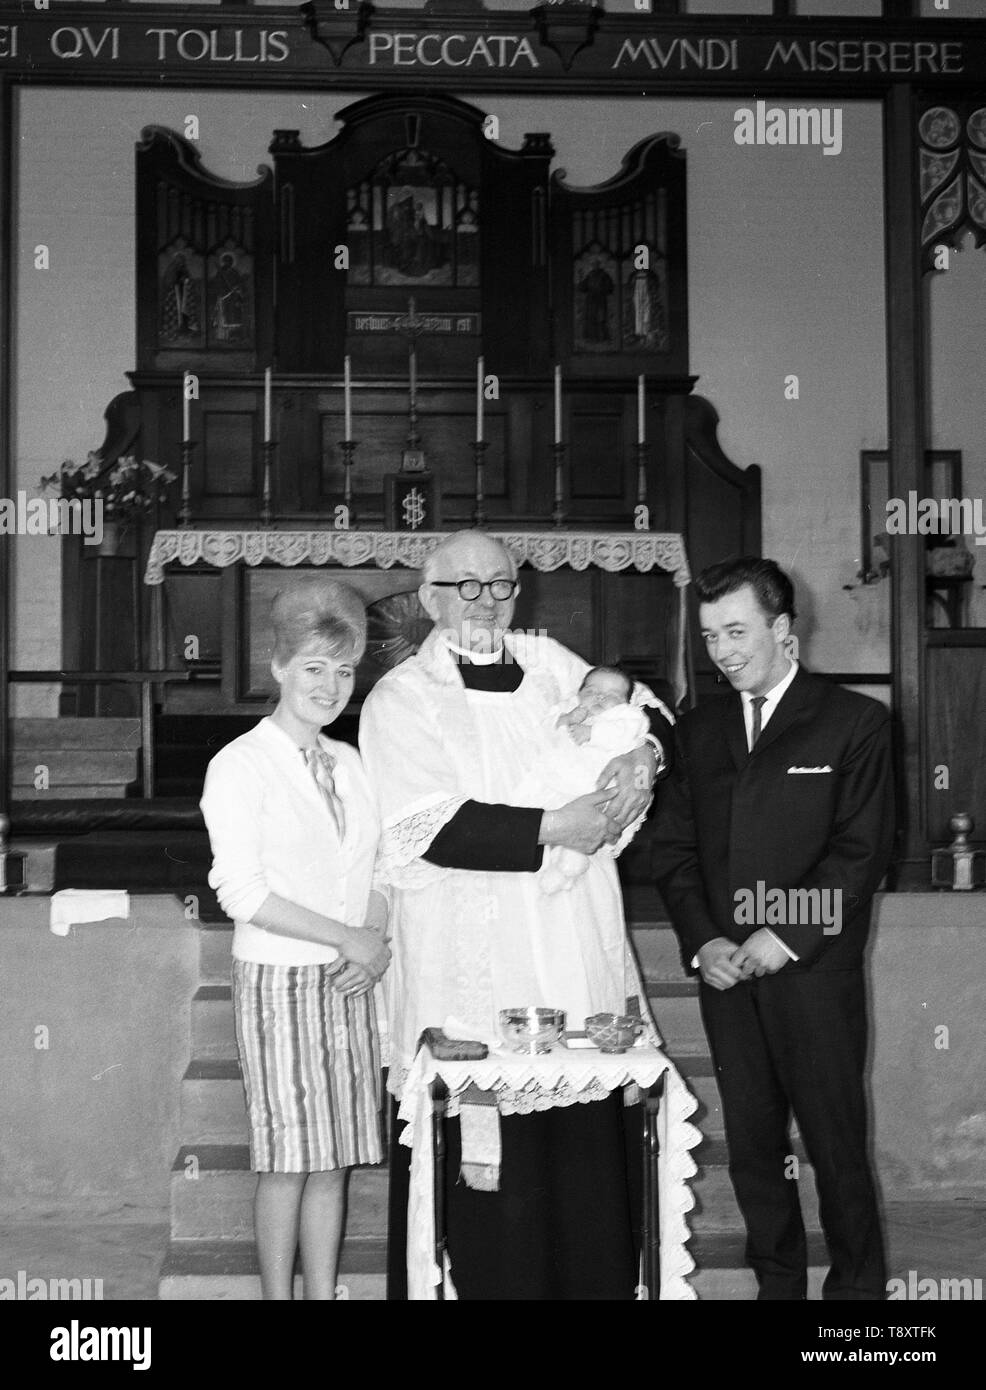 A Baby Christening in the UK c1962  Mum, Dad with baby and Vicar inside the church  Photo by Tony Henshaw Stock Photo